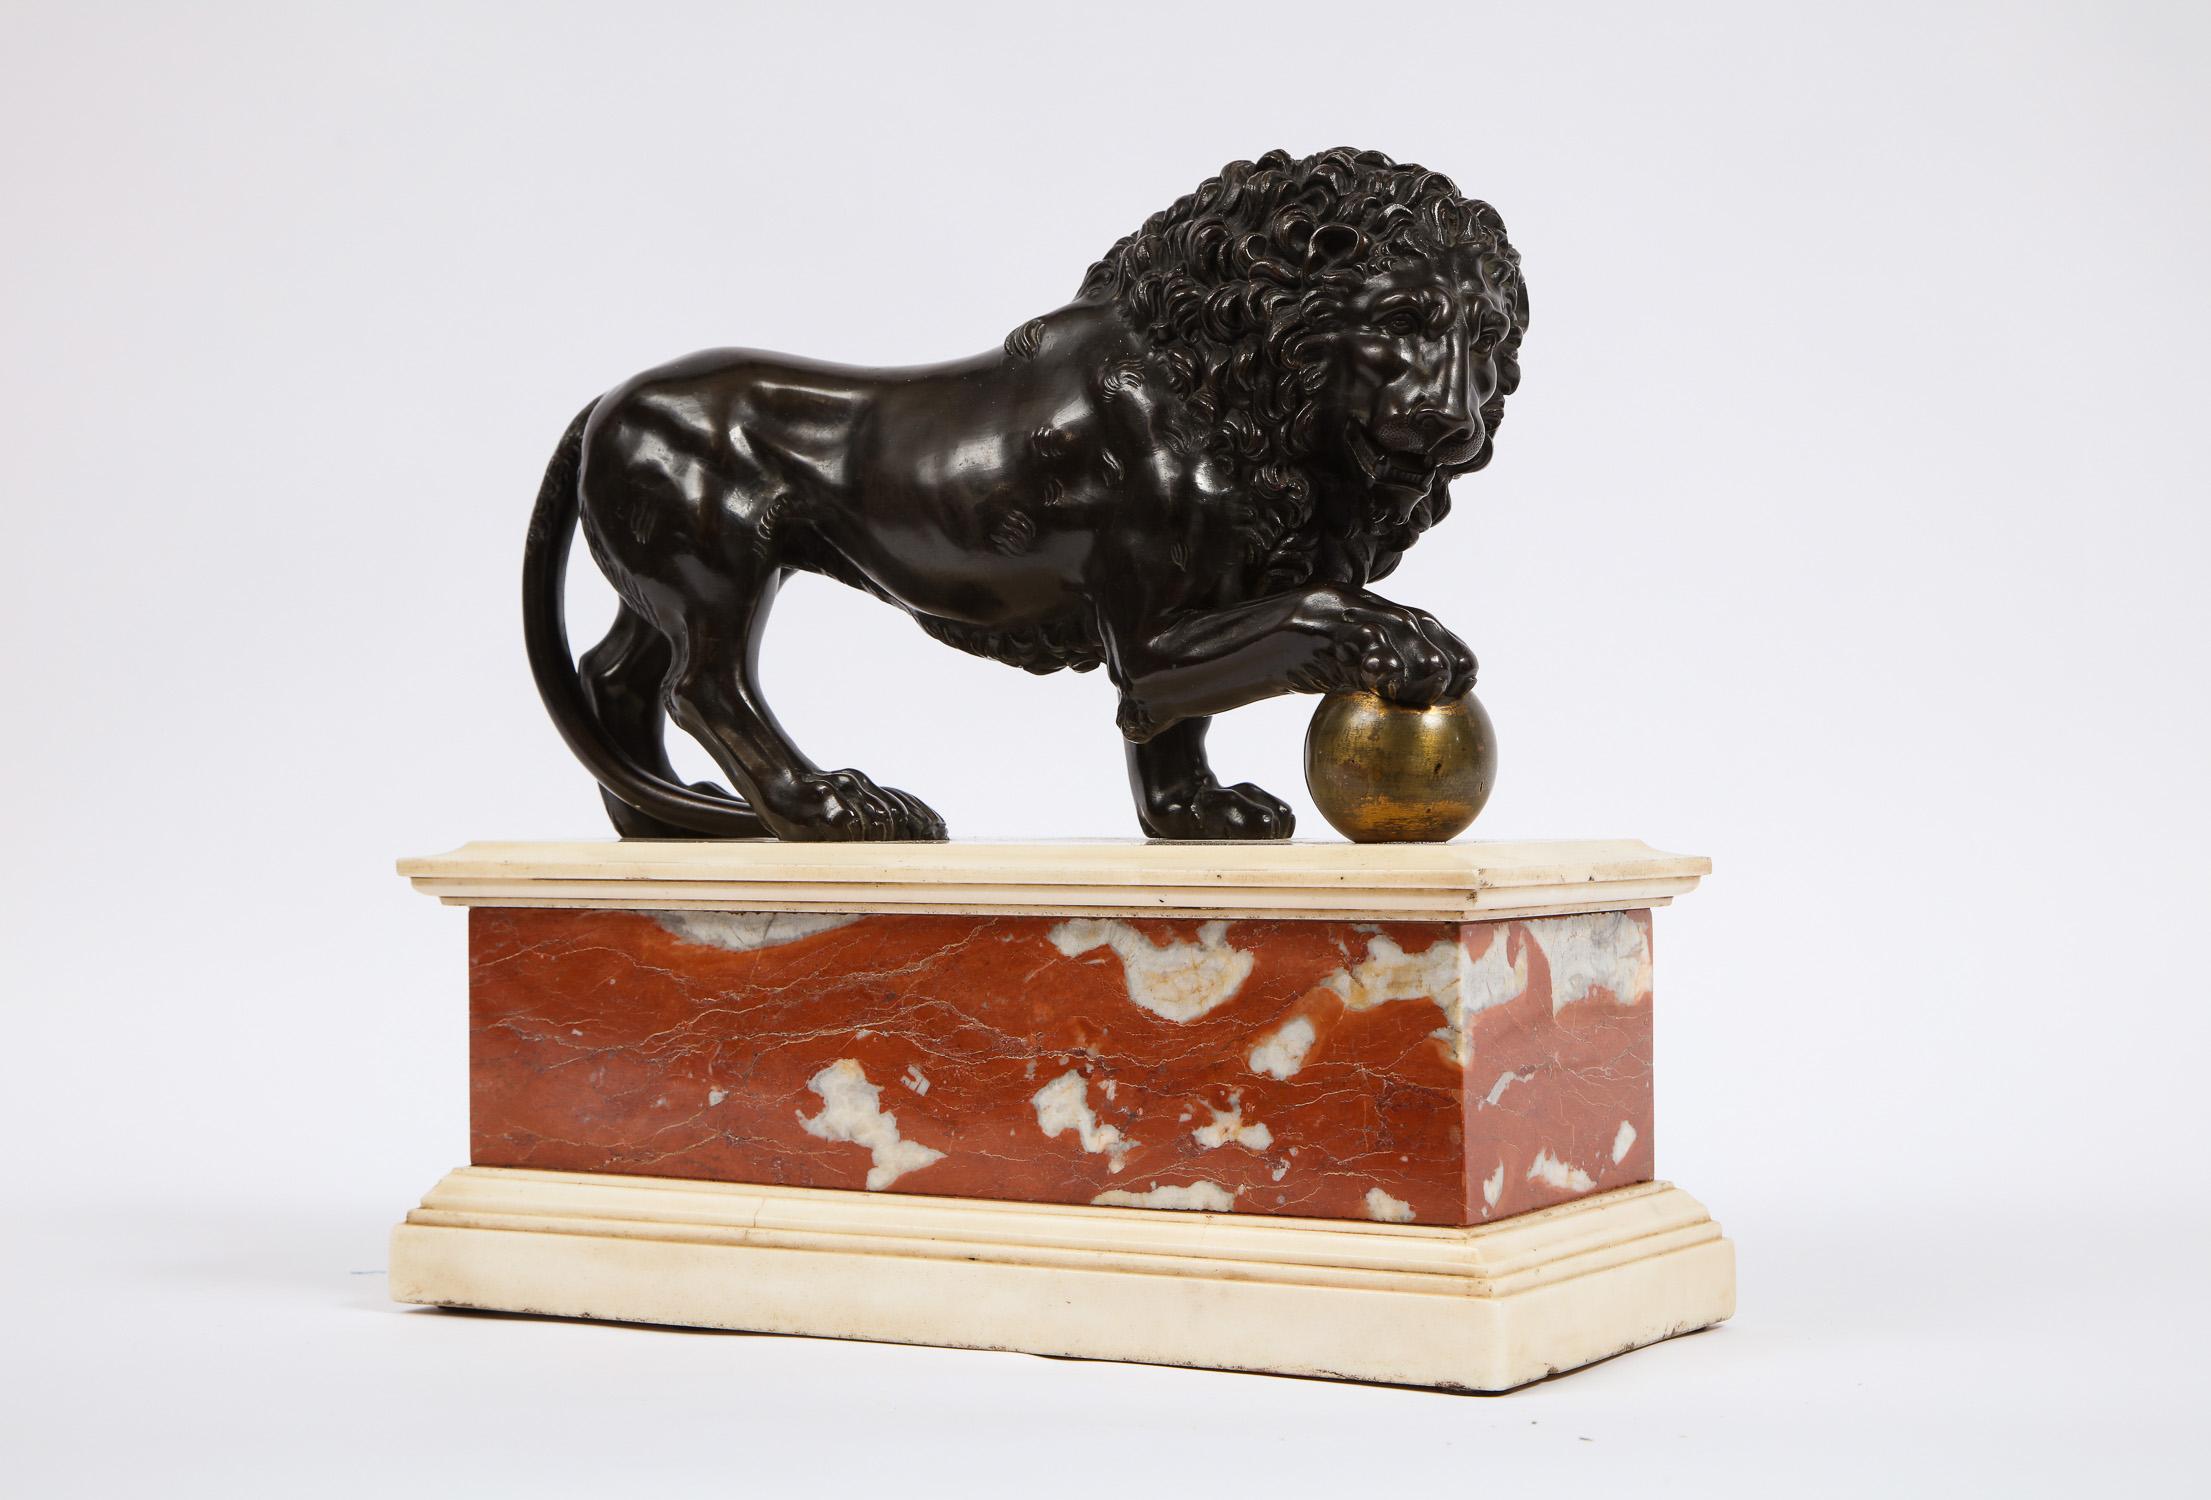 Italian Neoclassical Grand Tour Patinated/Gilt Bronze and Marble Model of Medici Lion